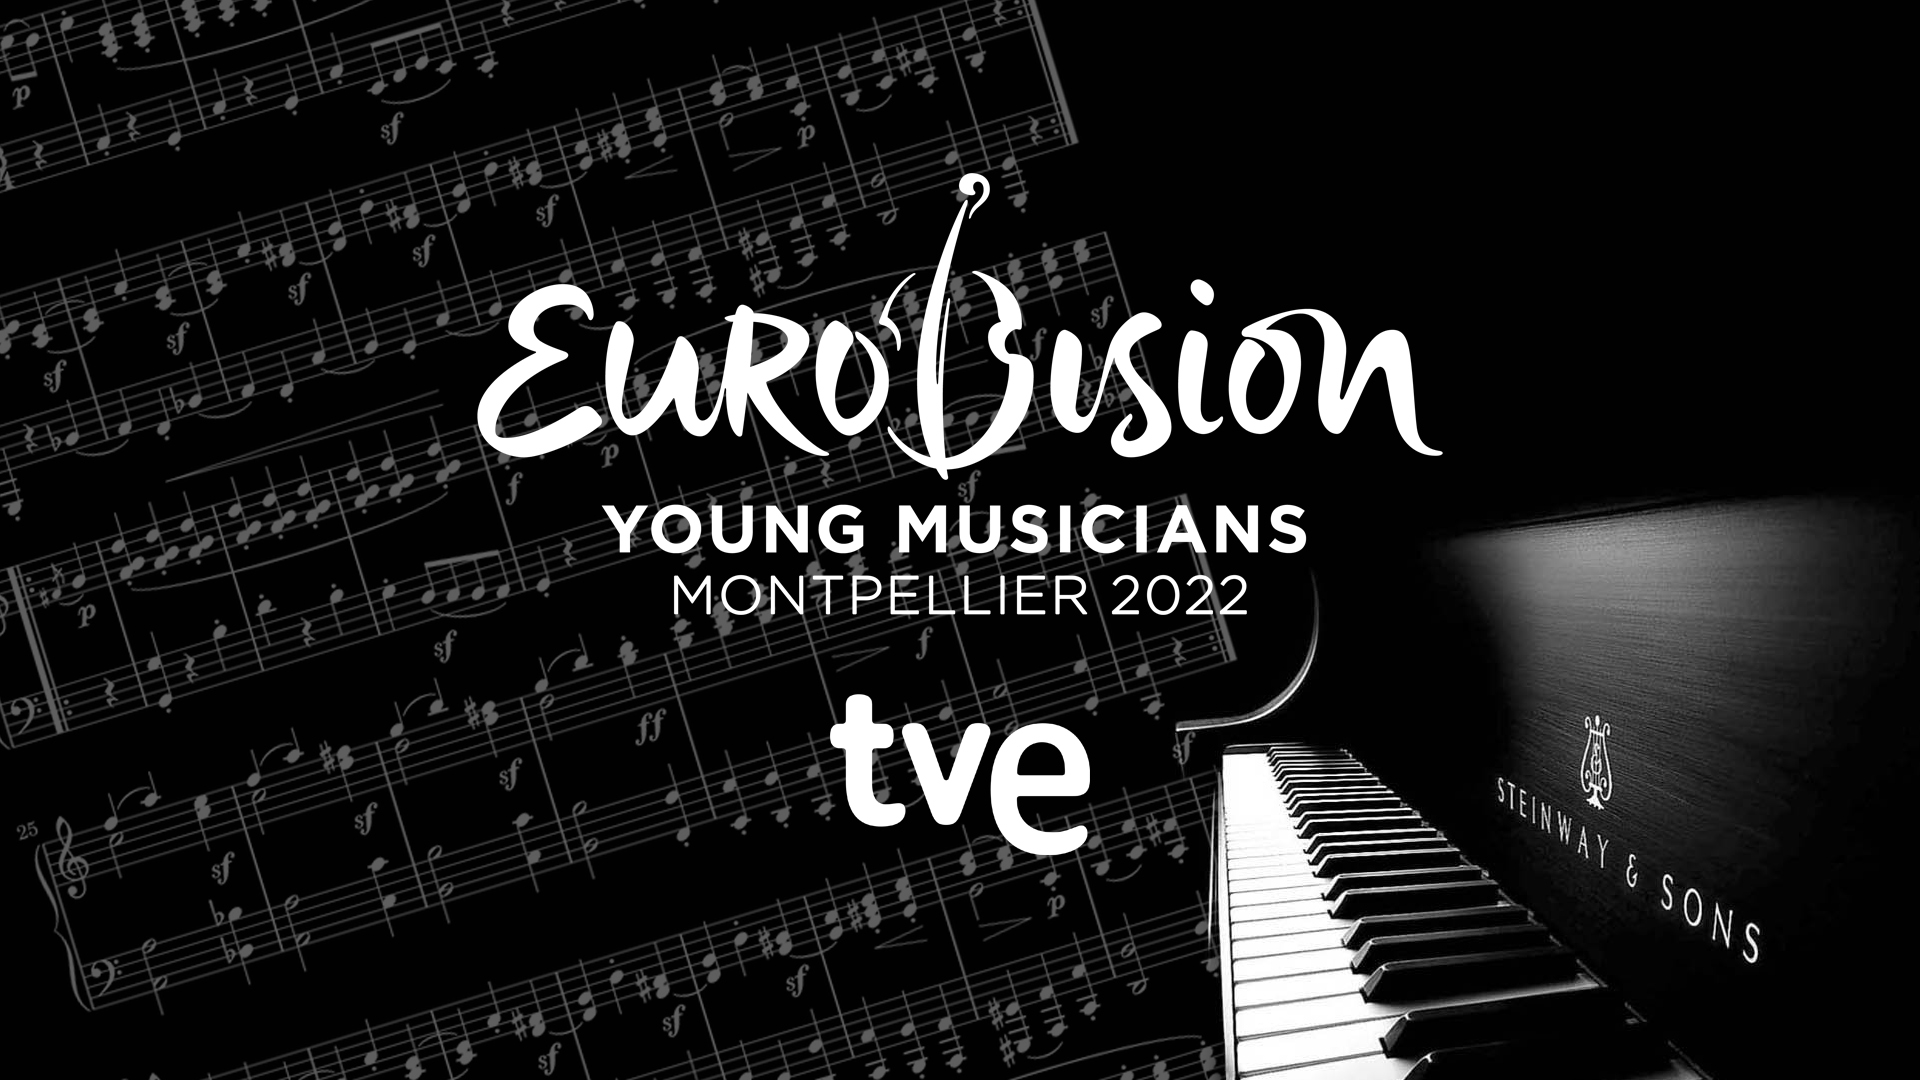 RTVE explains the reasons for its absence from the Eurovision Young Musicians 2022